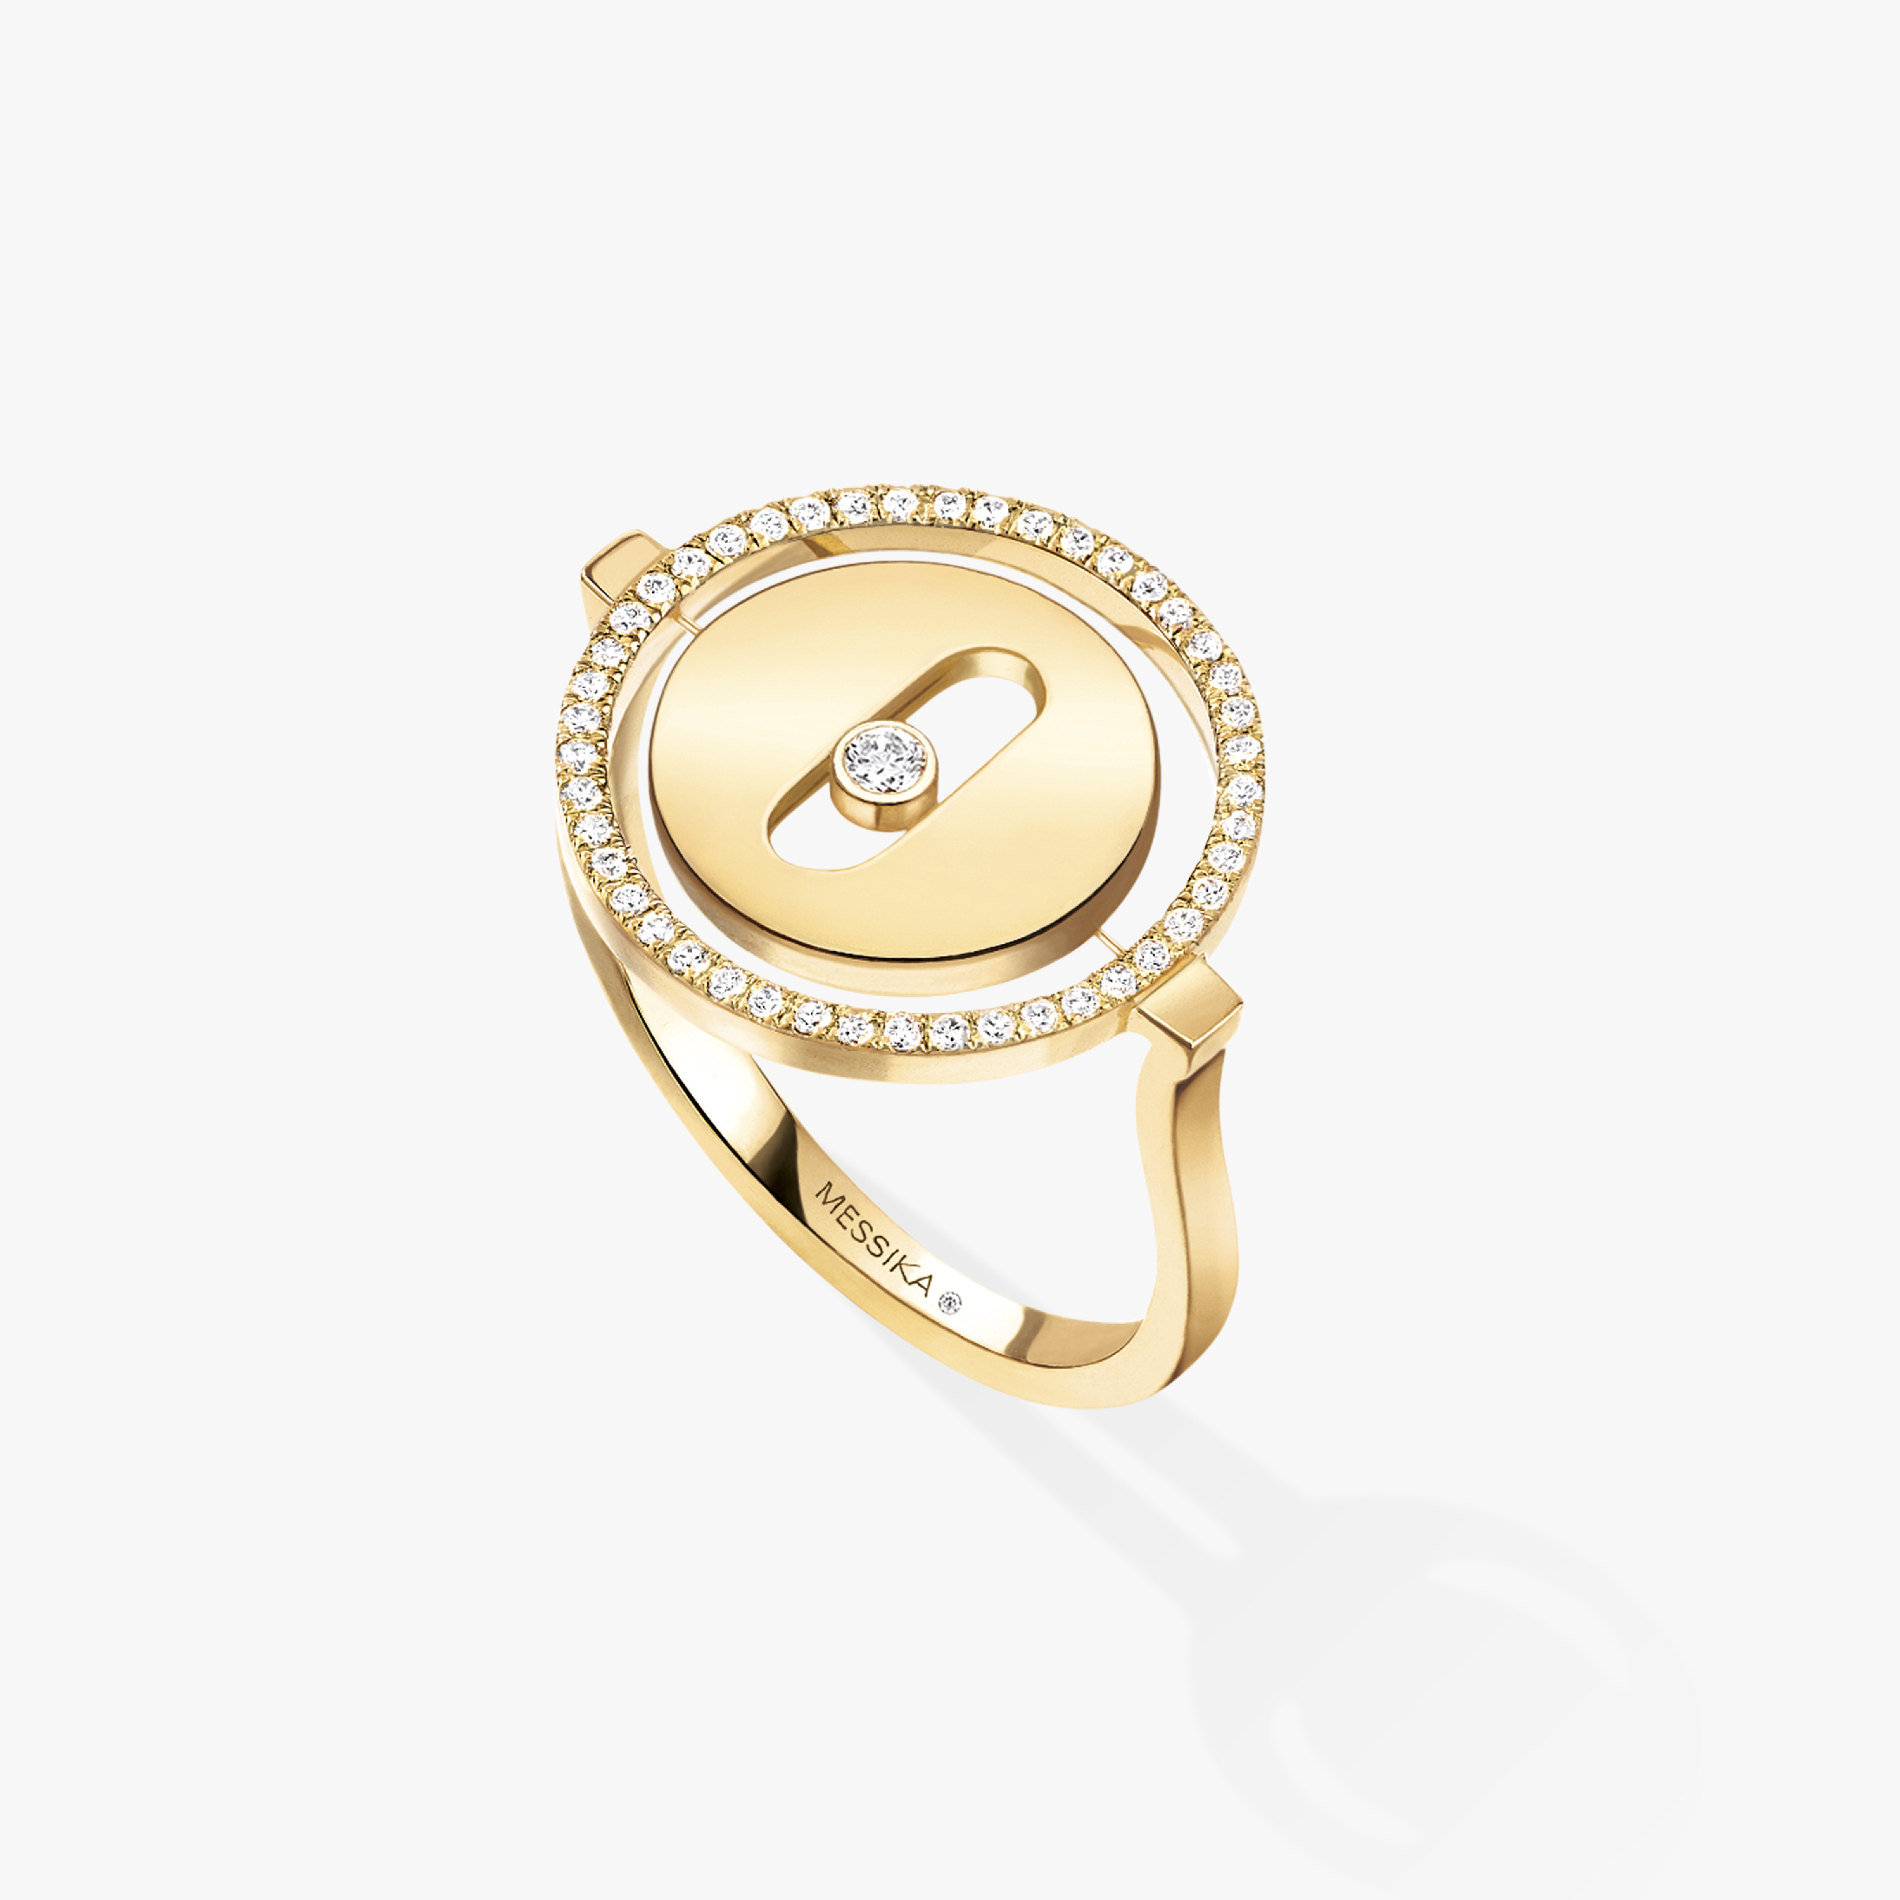 Bague Femme Or Jaune Diamant Lucky Move PM 07470-YG